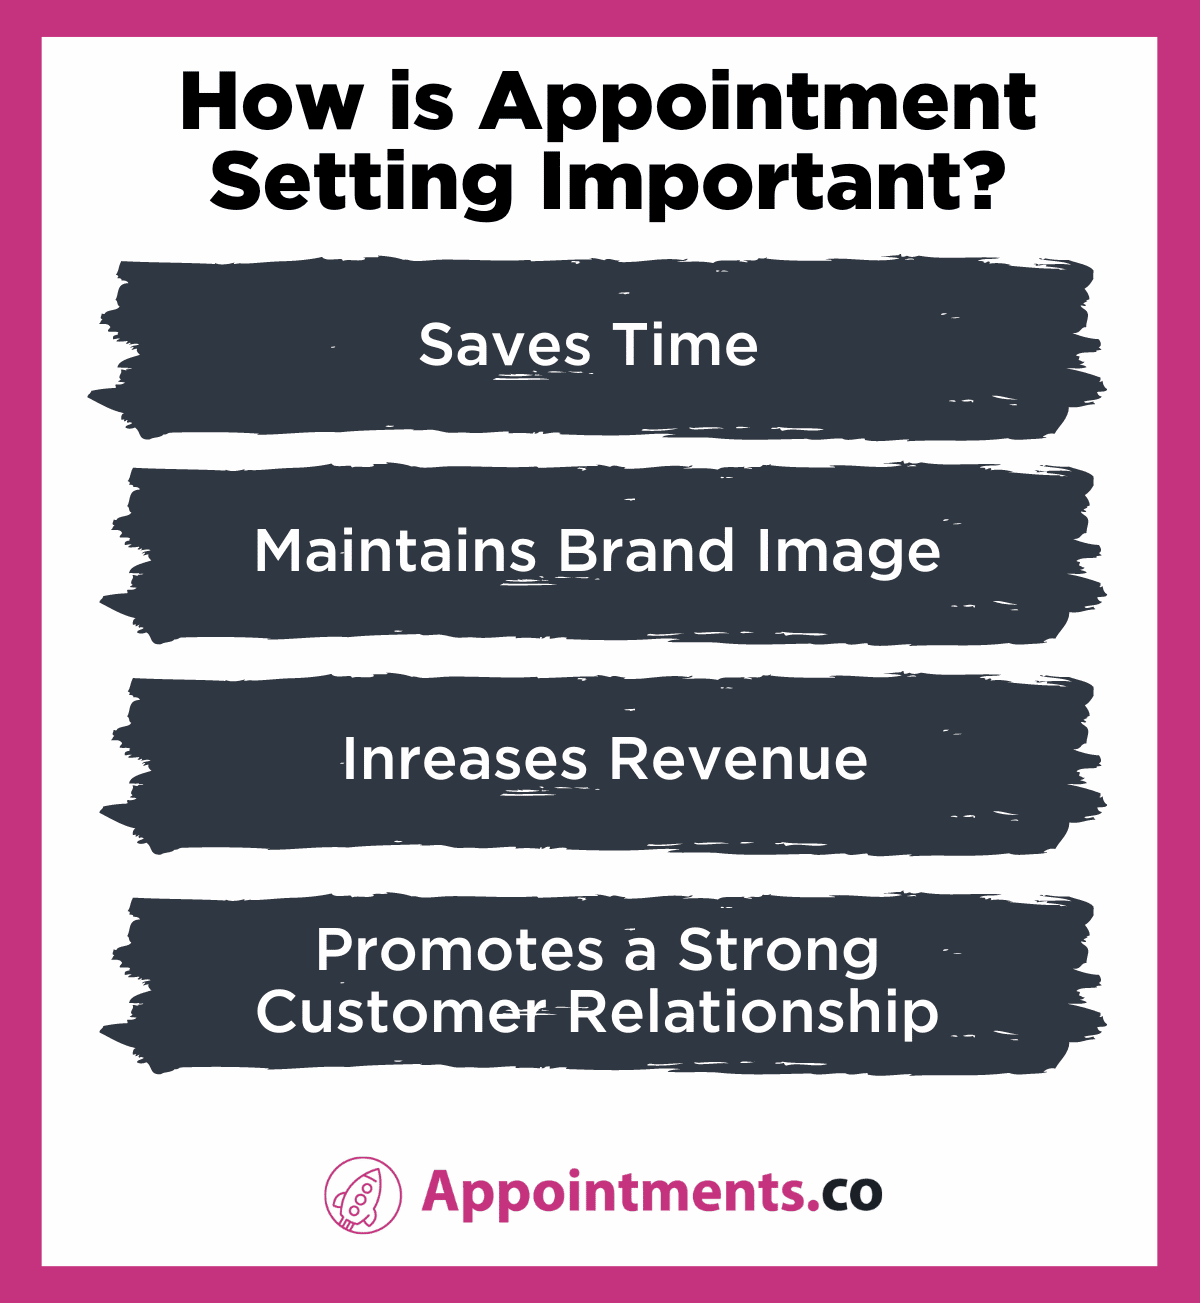 How is Appointment Setting Service Important